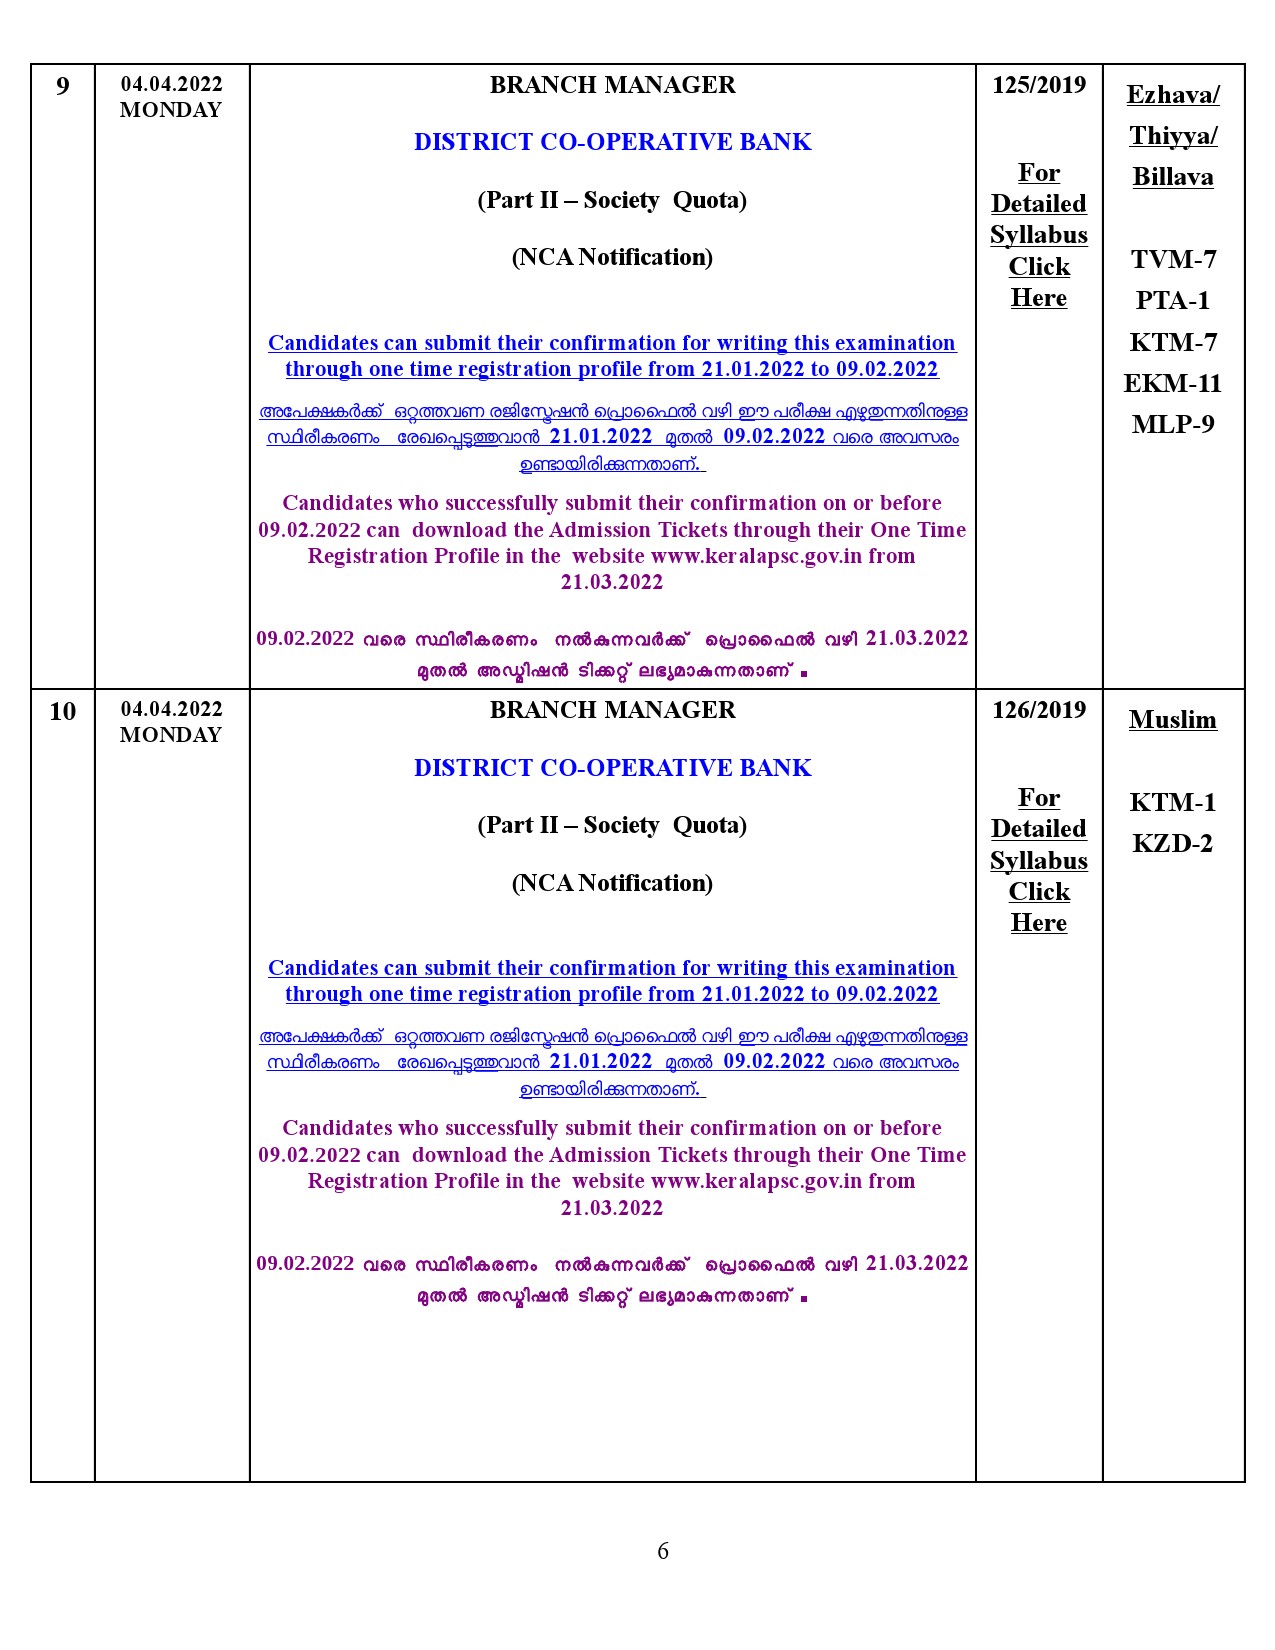 Examination Programme For The Month Of April 2022 - Notification Image 6